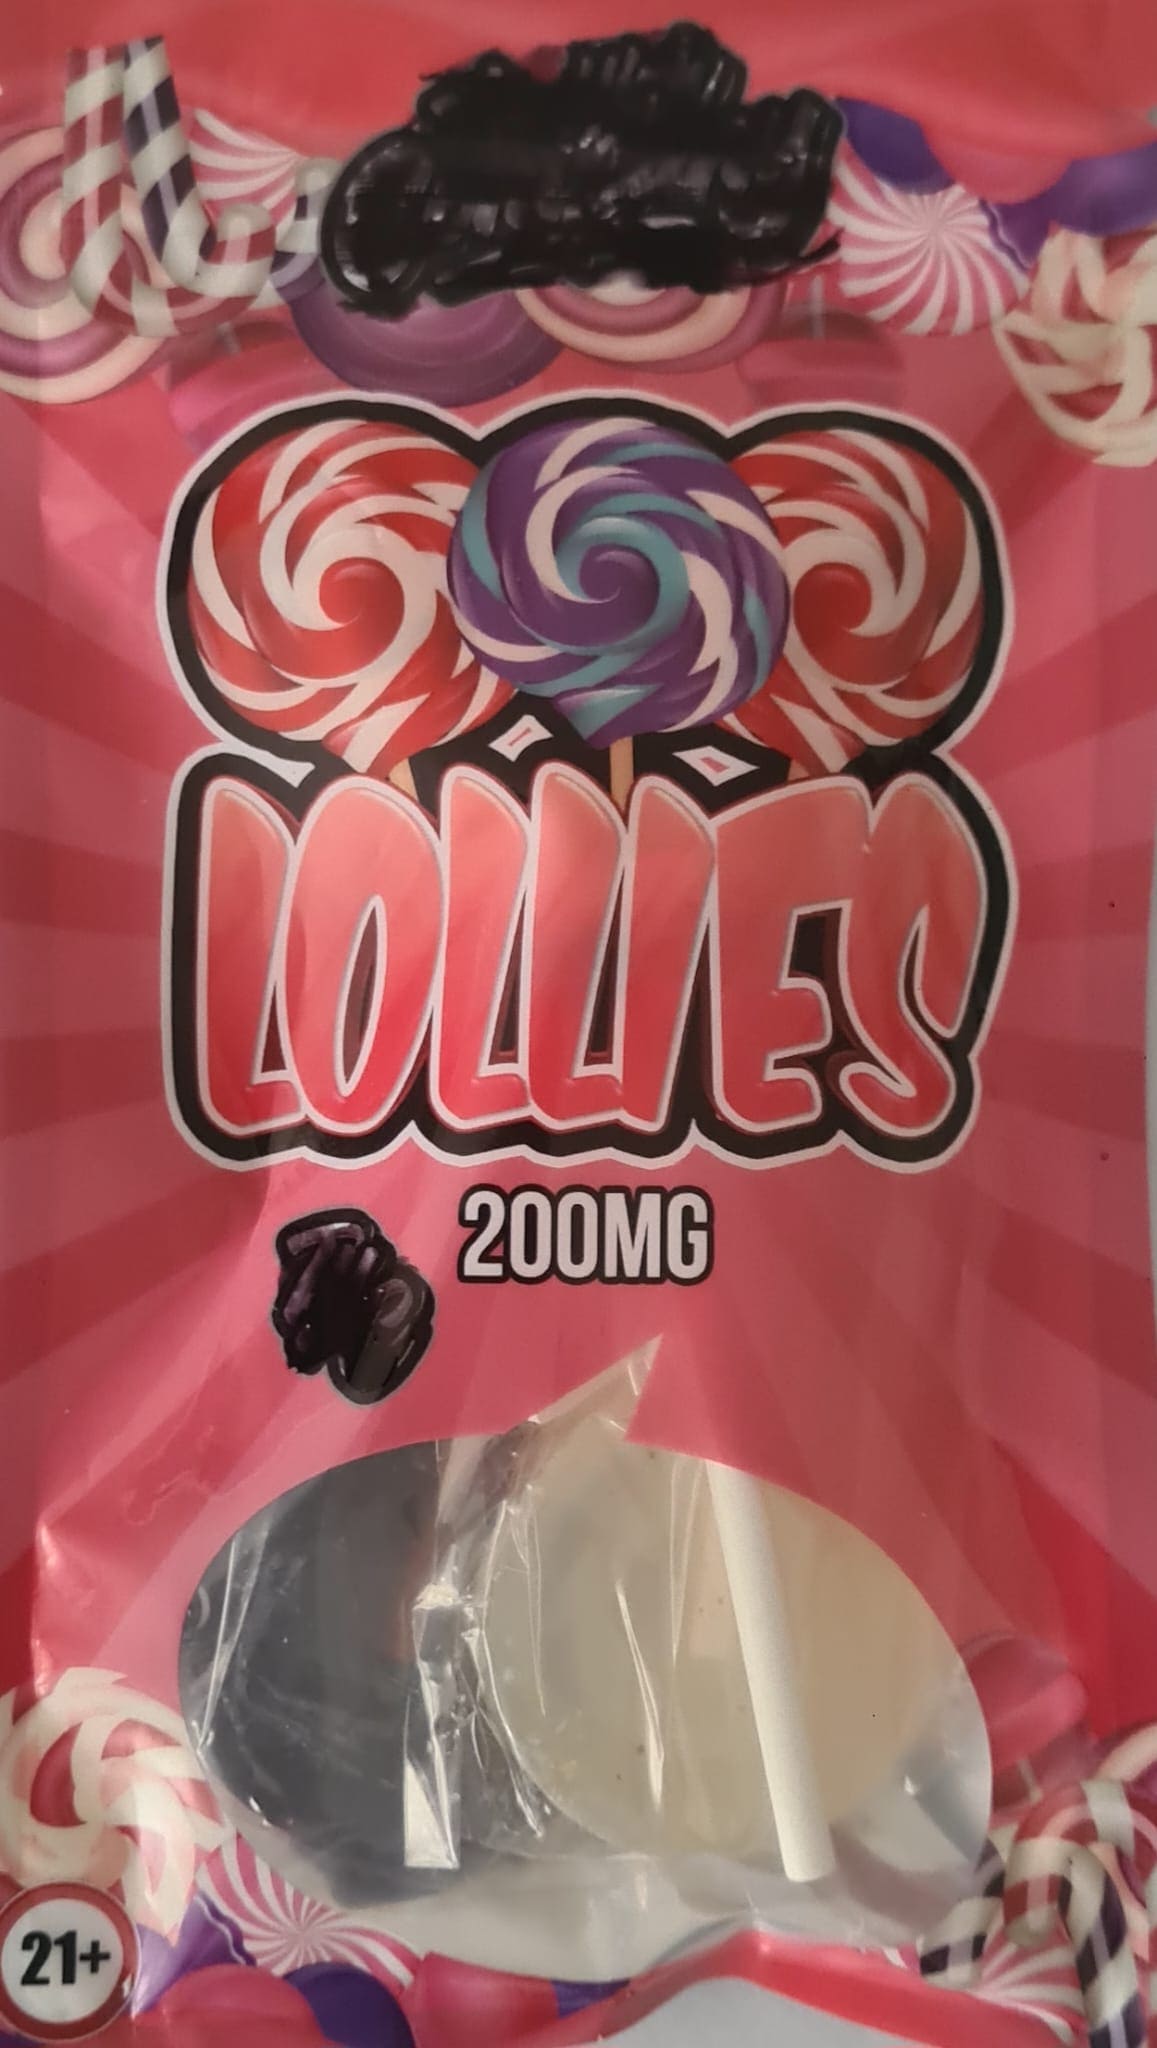 HHC 3 lolly's  70mg hhc per lolly slechts € 17,95